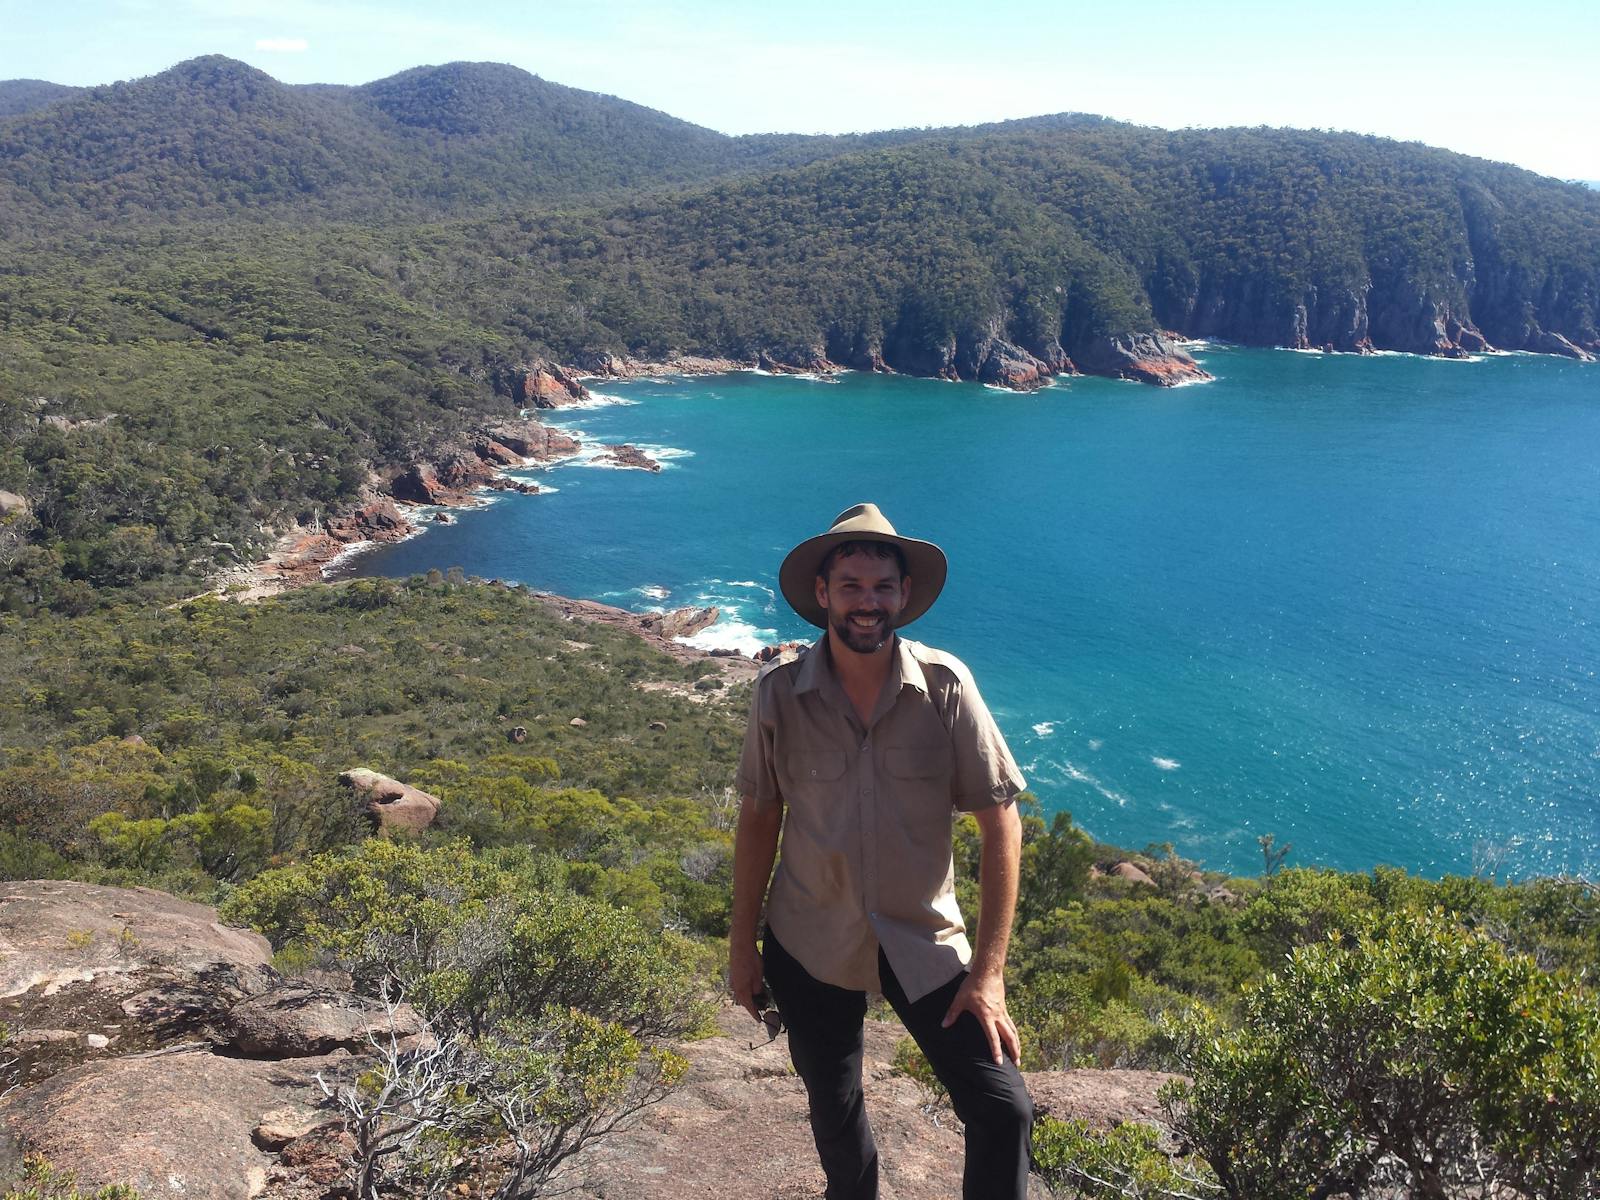 Views to make you smile on the Freycinet & Wineglass Bay Pack-Free Walk by Life's An Adventure